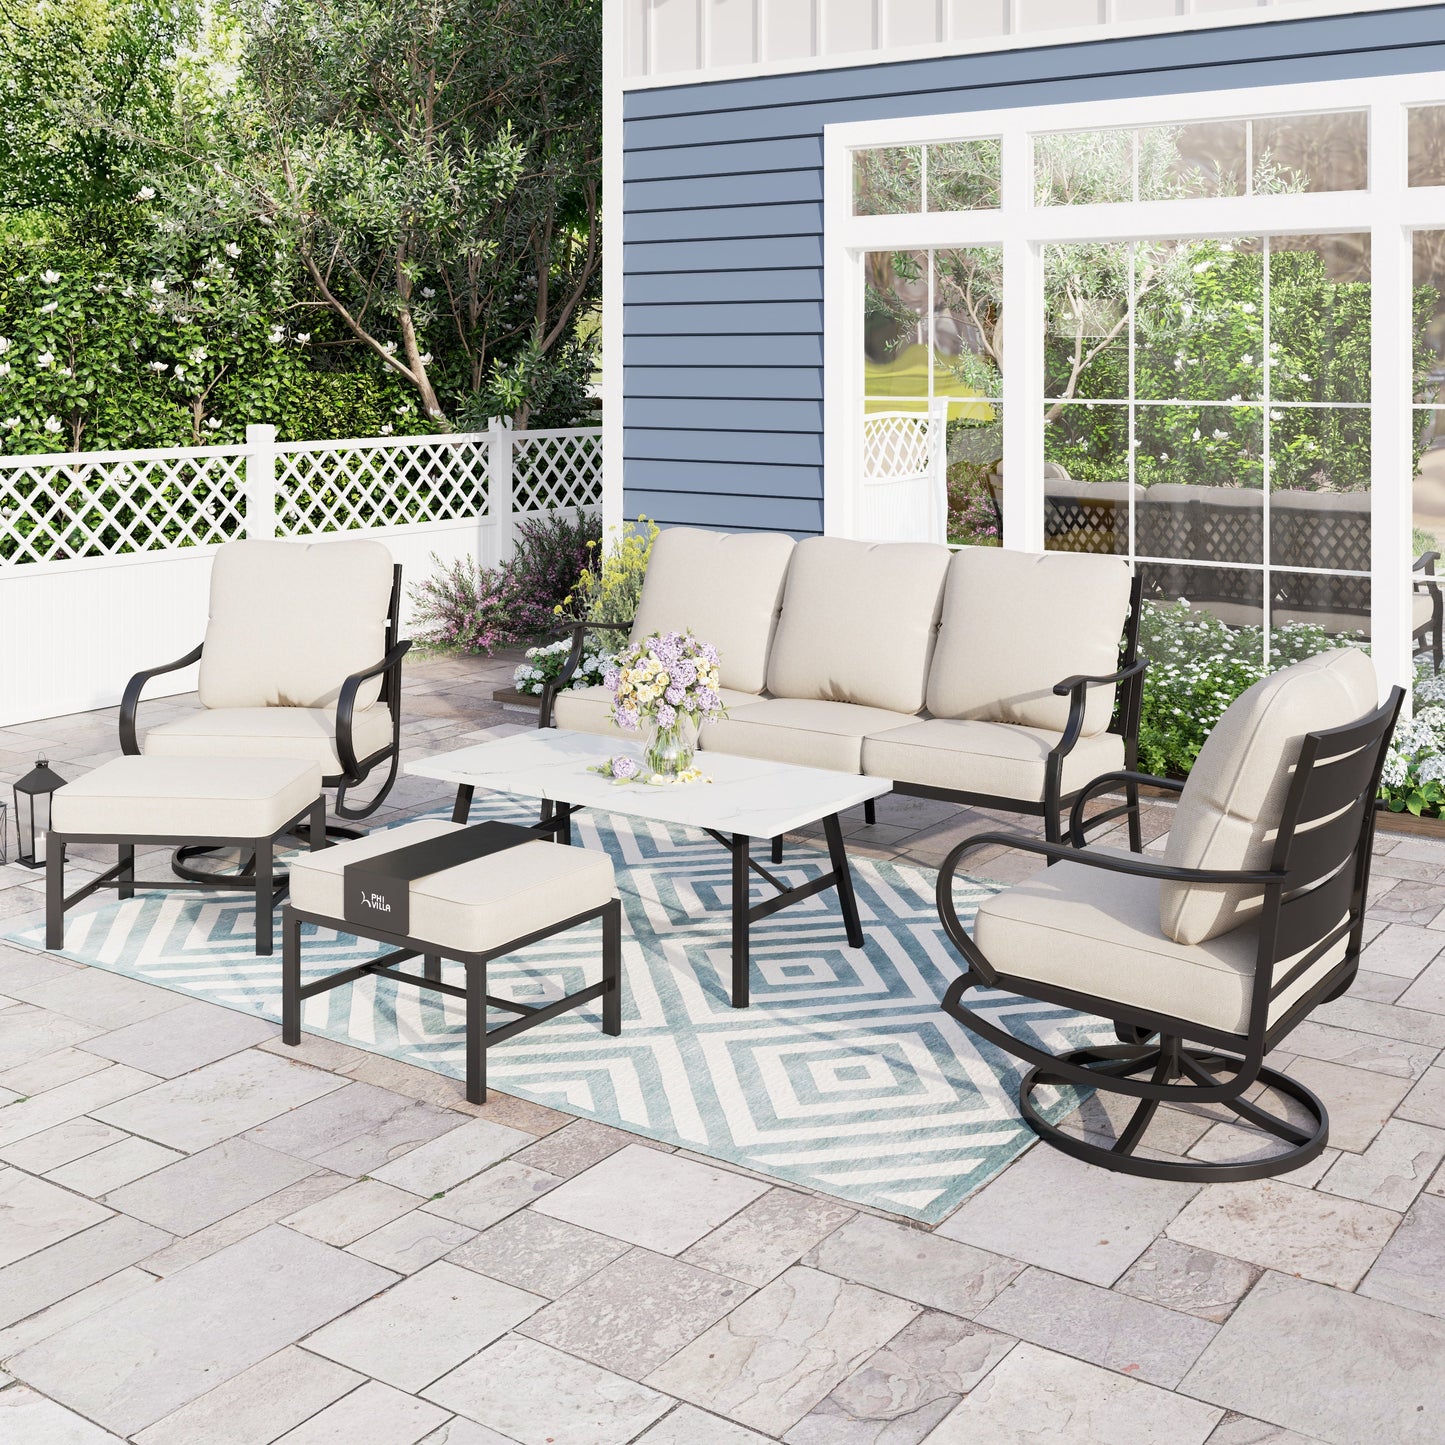 Sophia&William 6 Piece Patio Conversation Set Patio Table and Swivel Chairs Sets with Cushions and Pillows